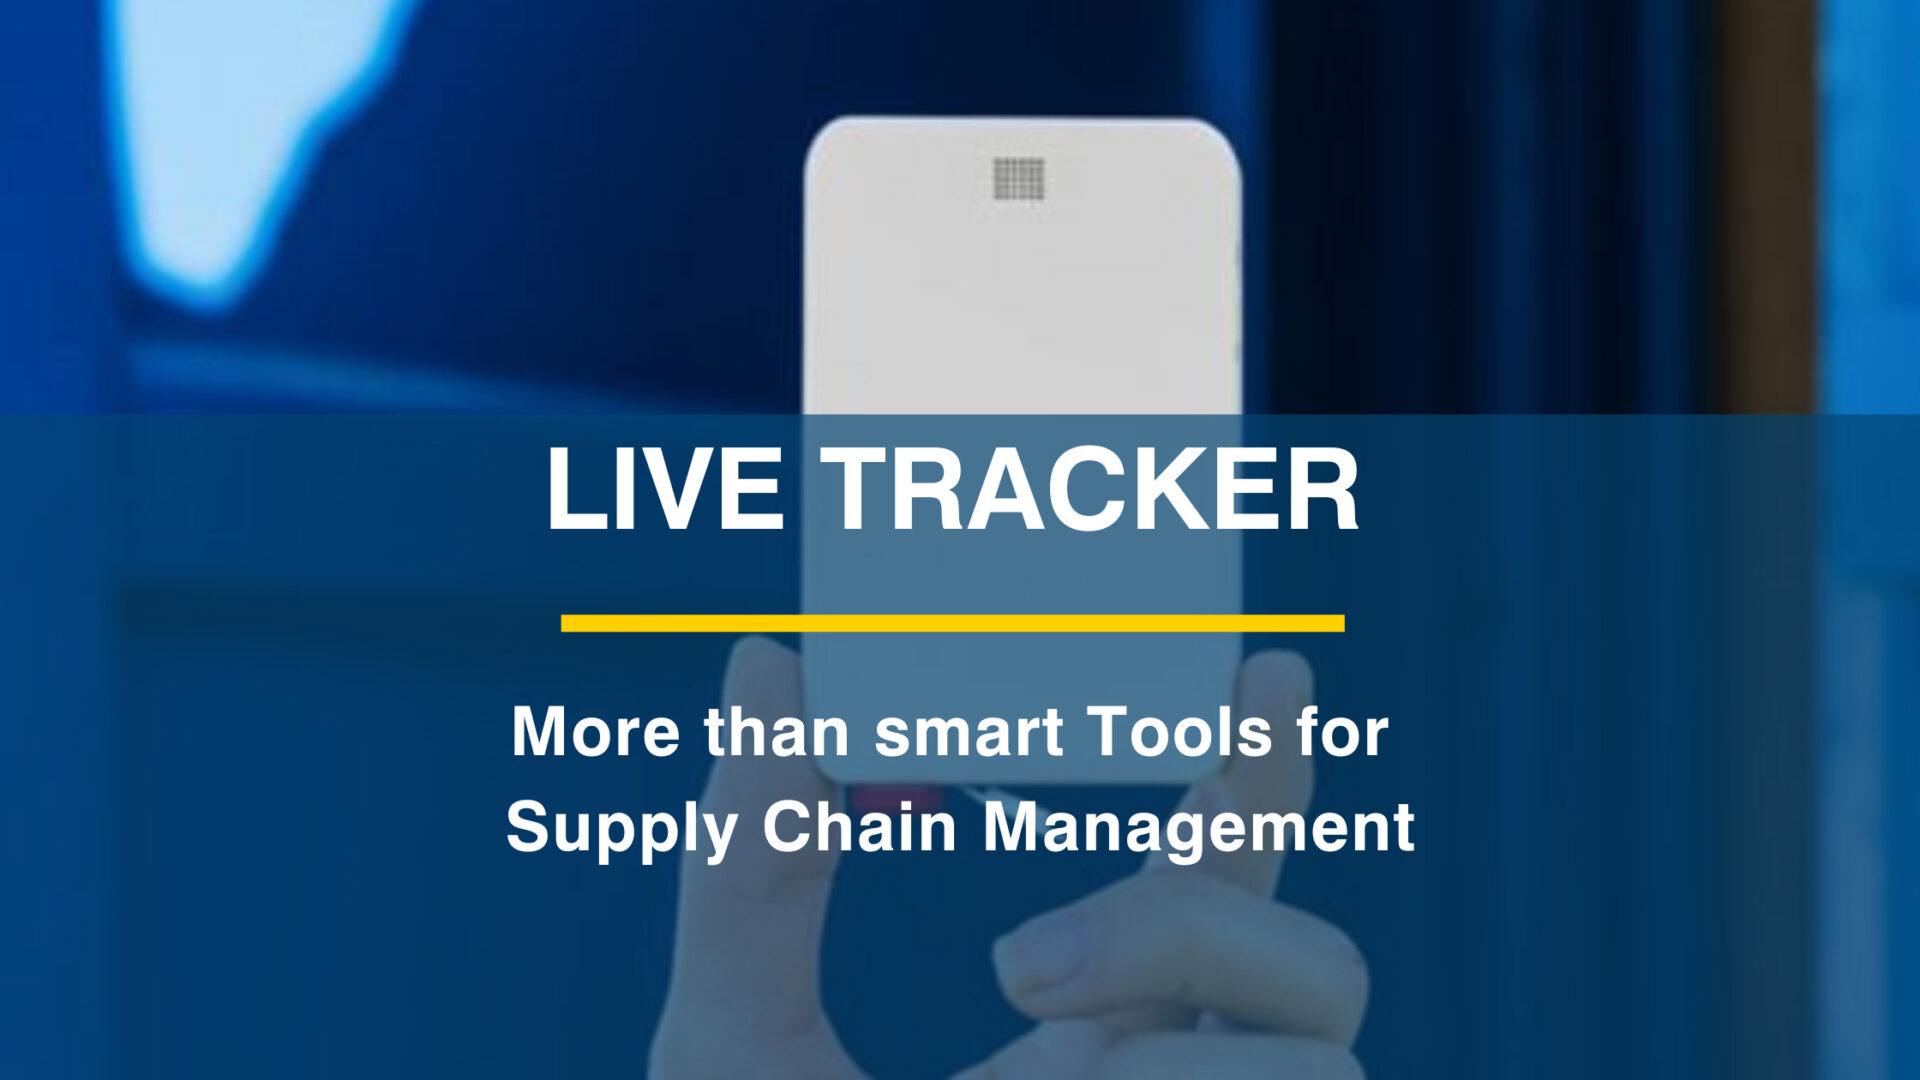 Why live trackers are more than just smart gadgets for supply chain management